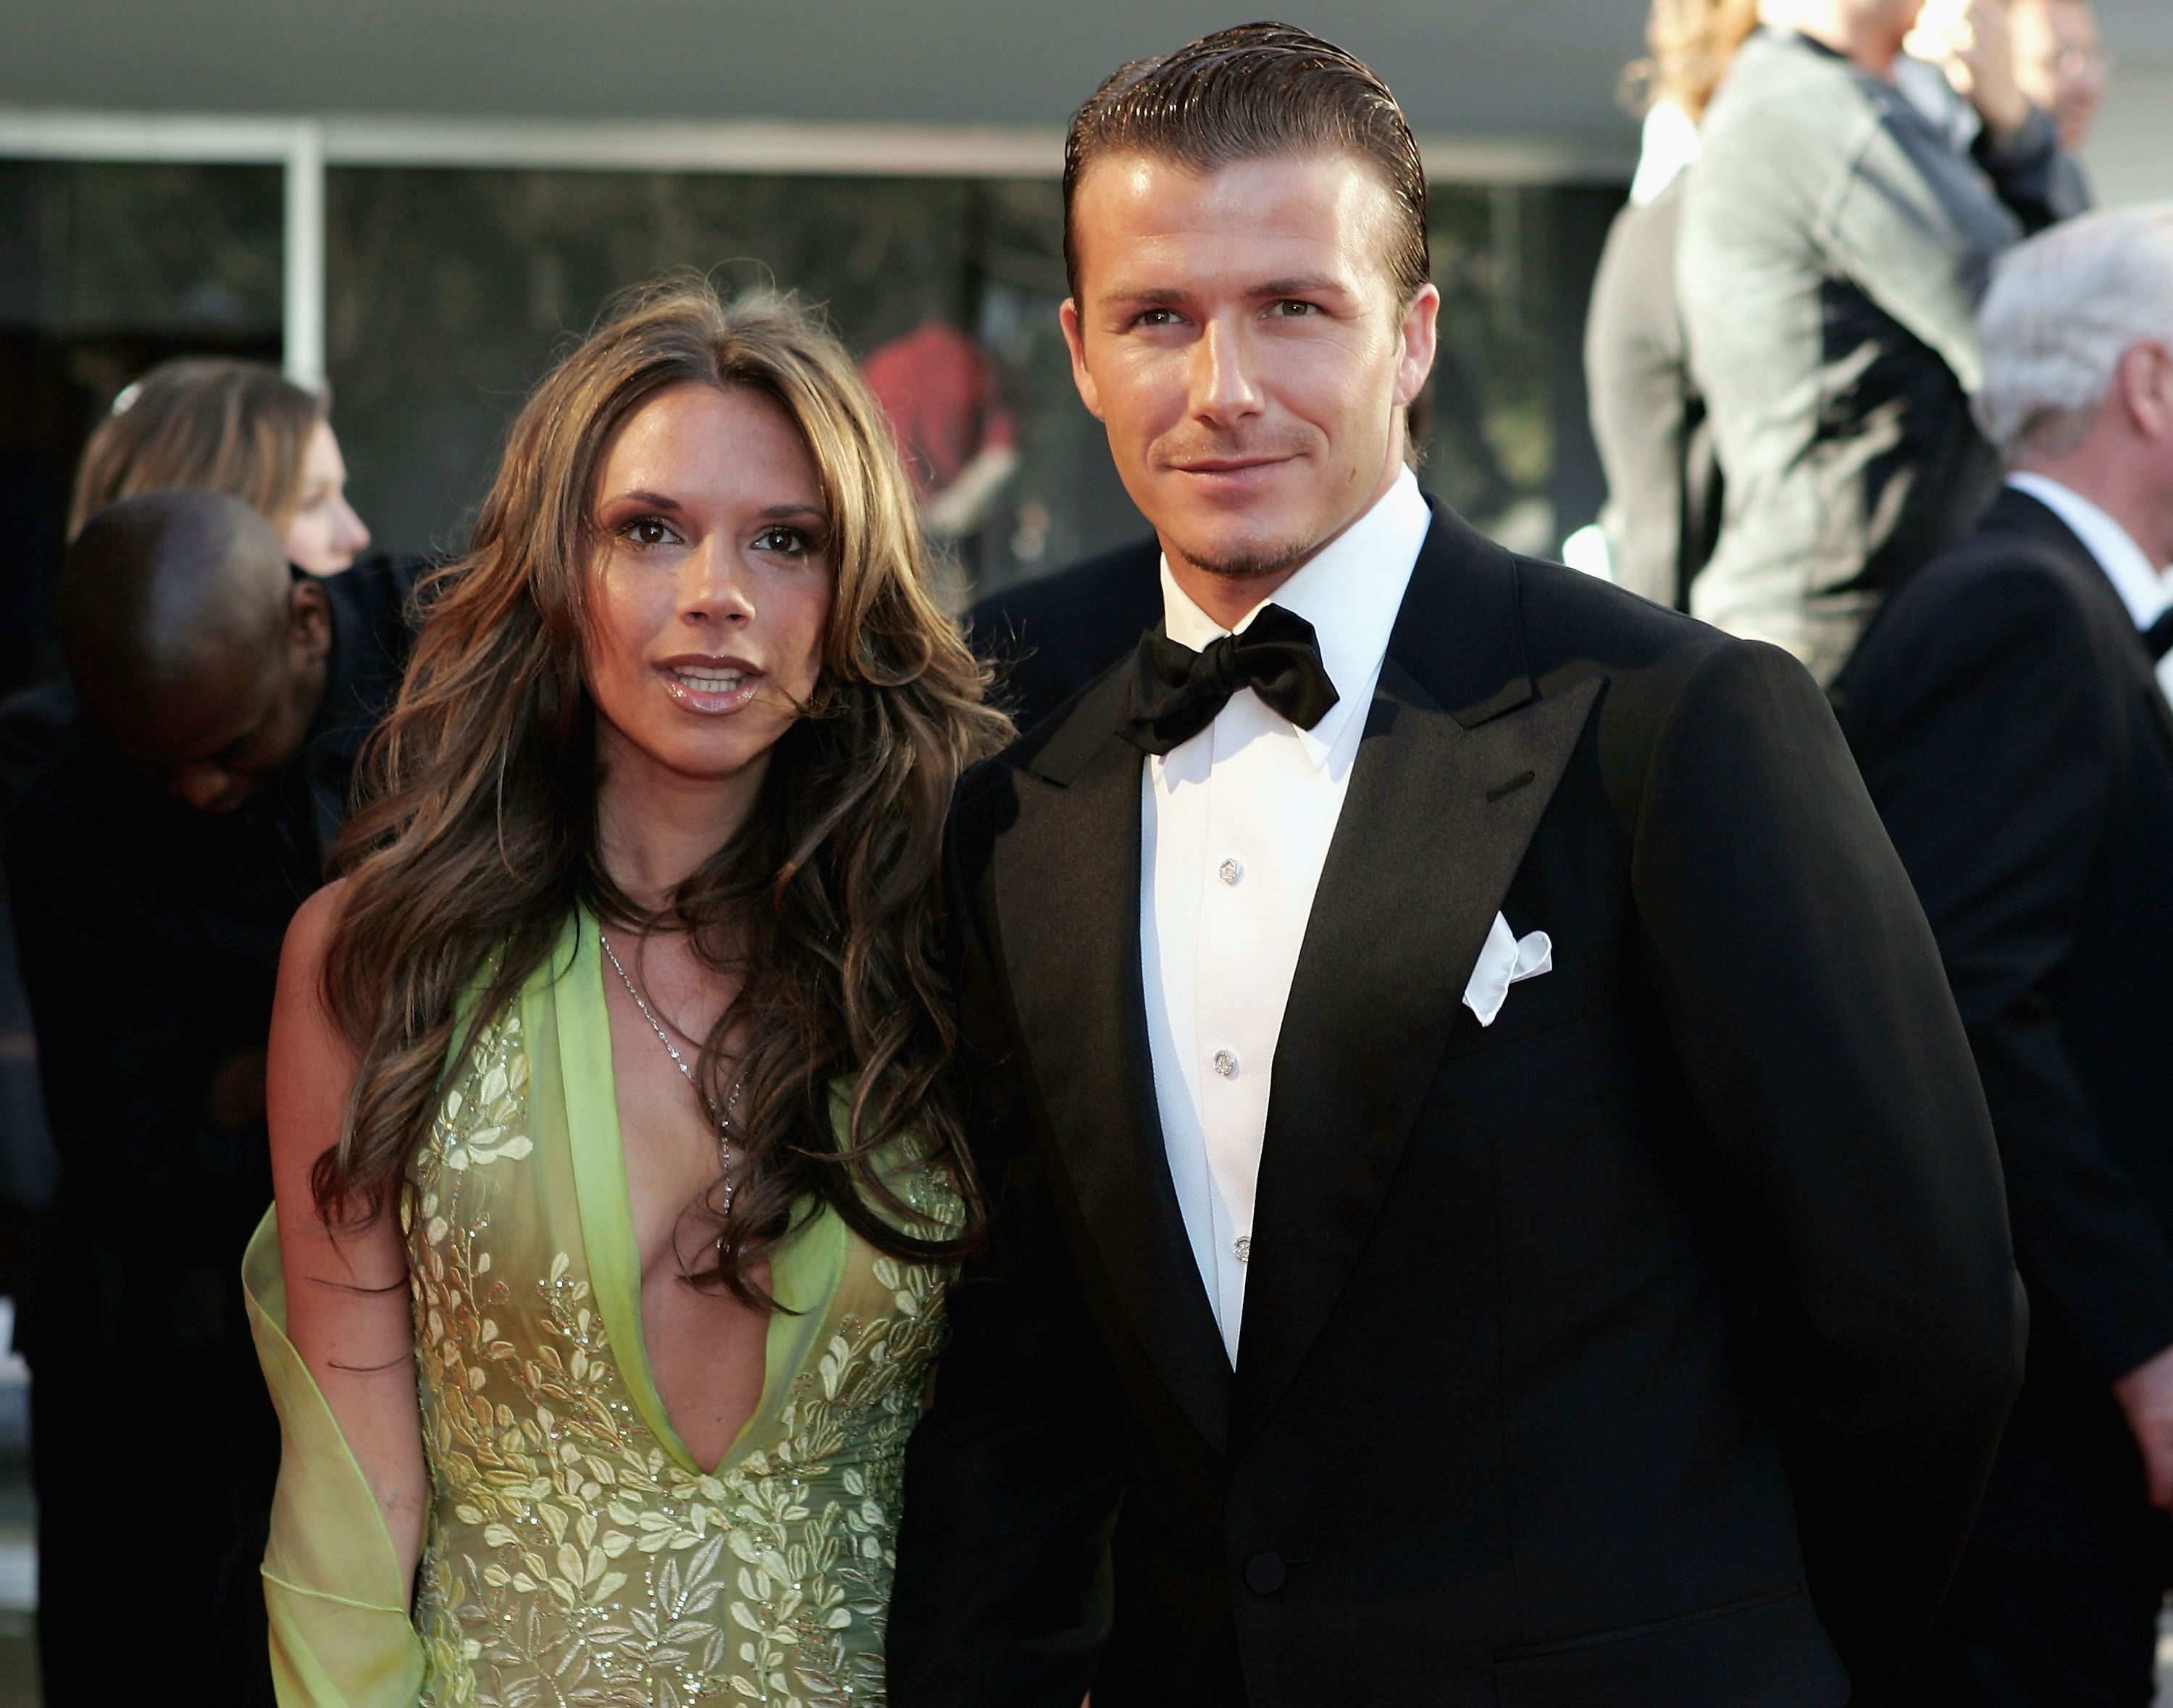 David Beckham and Victoria Beckham in Portugal in 2005 | Source: Getty Images